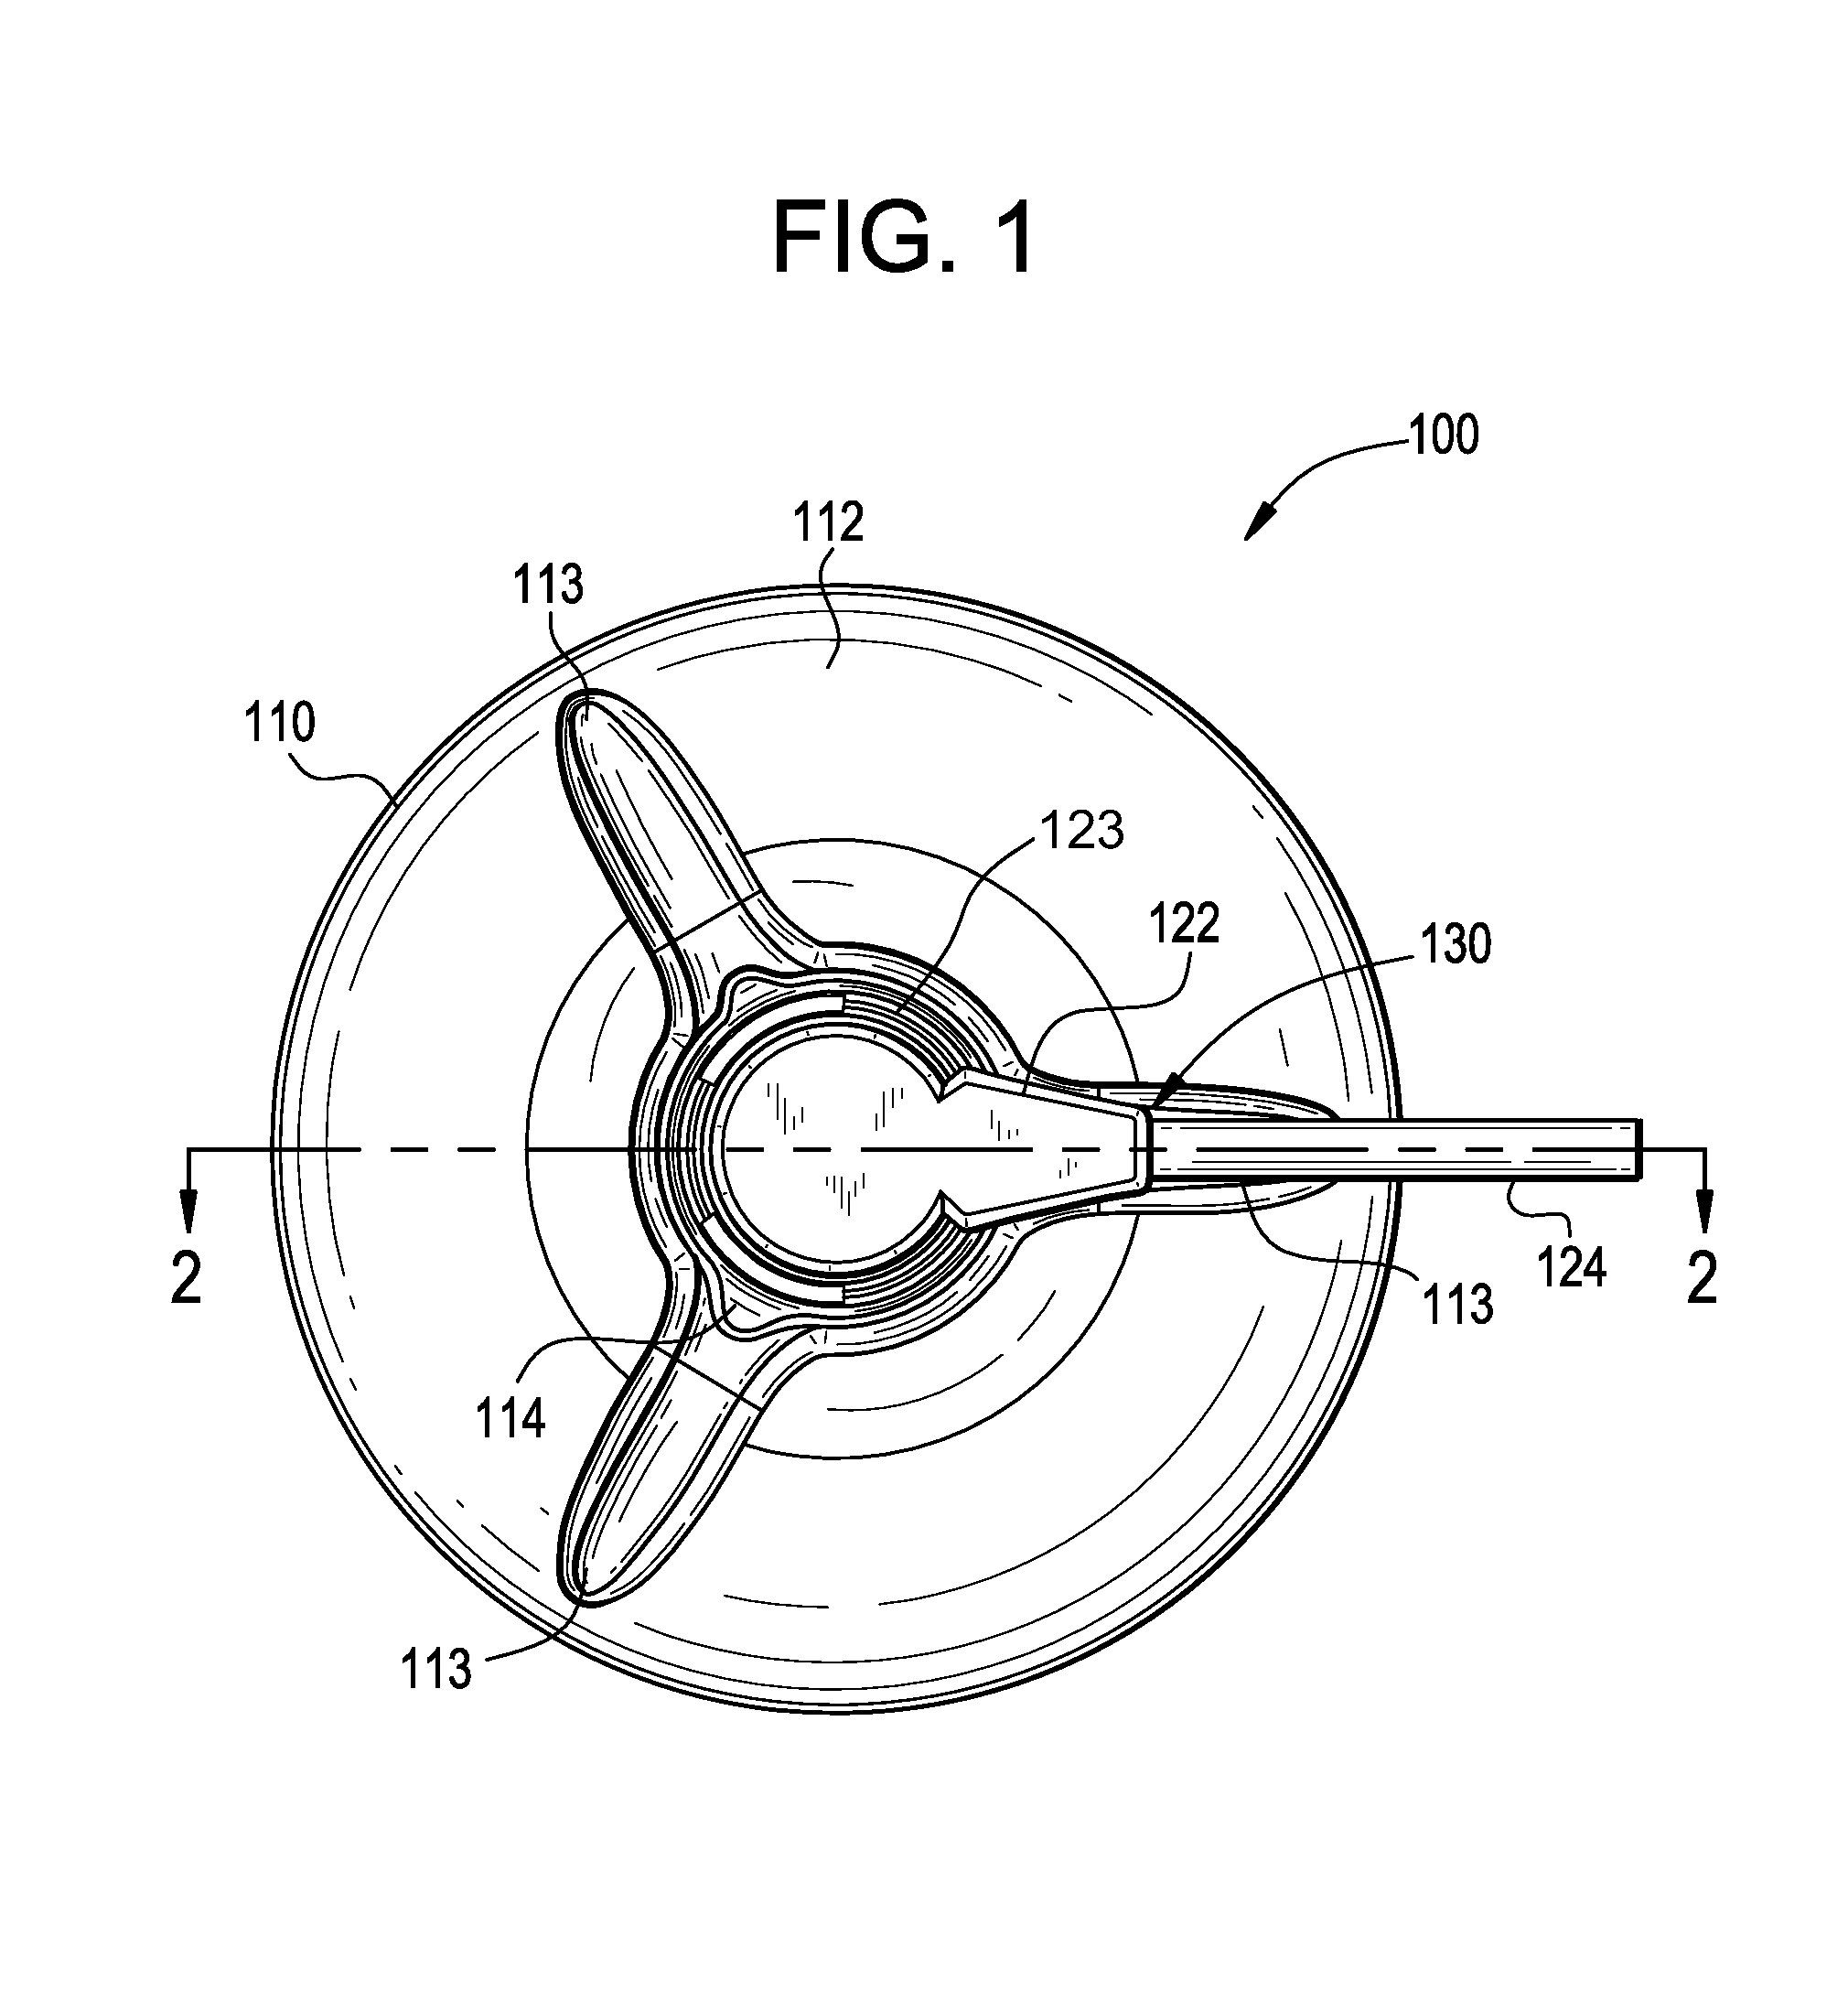 Disposable patch and reusable sensor assembly for use in medical device localization and mapping systems